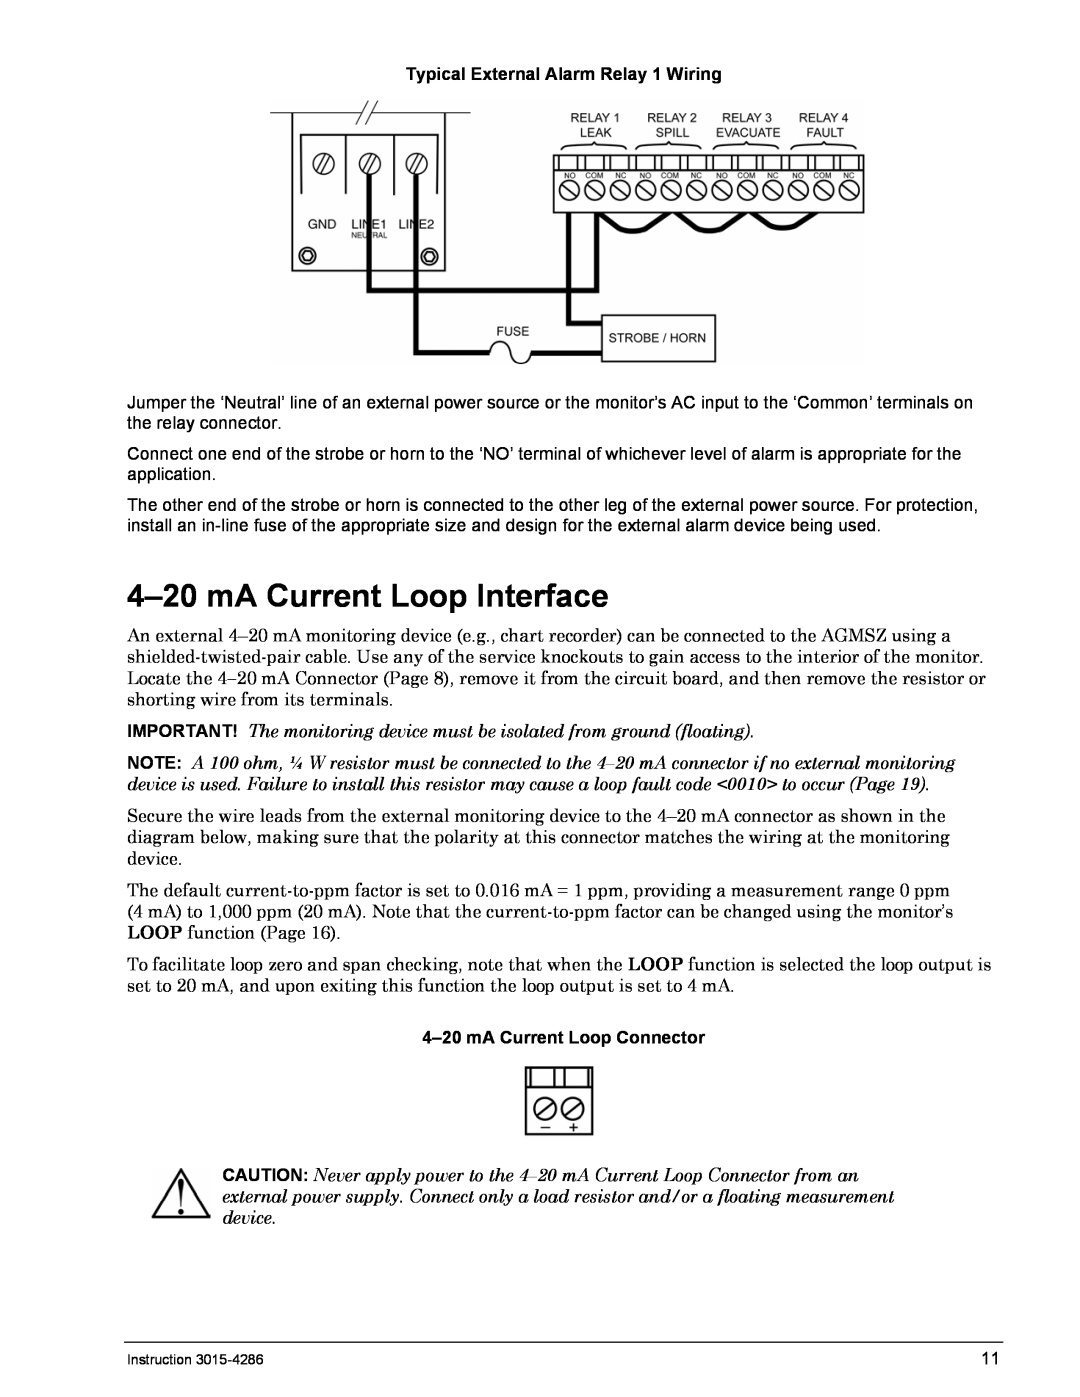 Bacharach 3015-4286 4-20mA Current Loop Interface, Typical External Alarm Relay 1 Wiring, 4-20mA Current Loop Connector 